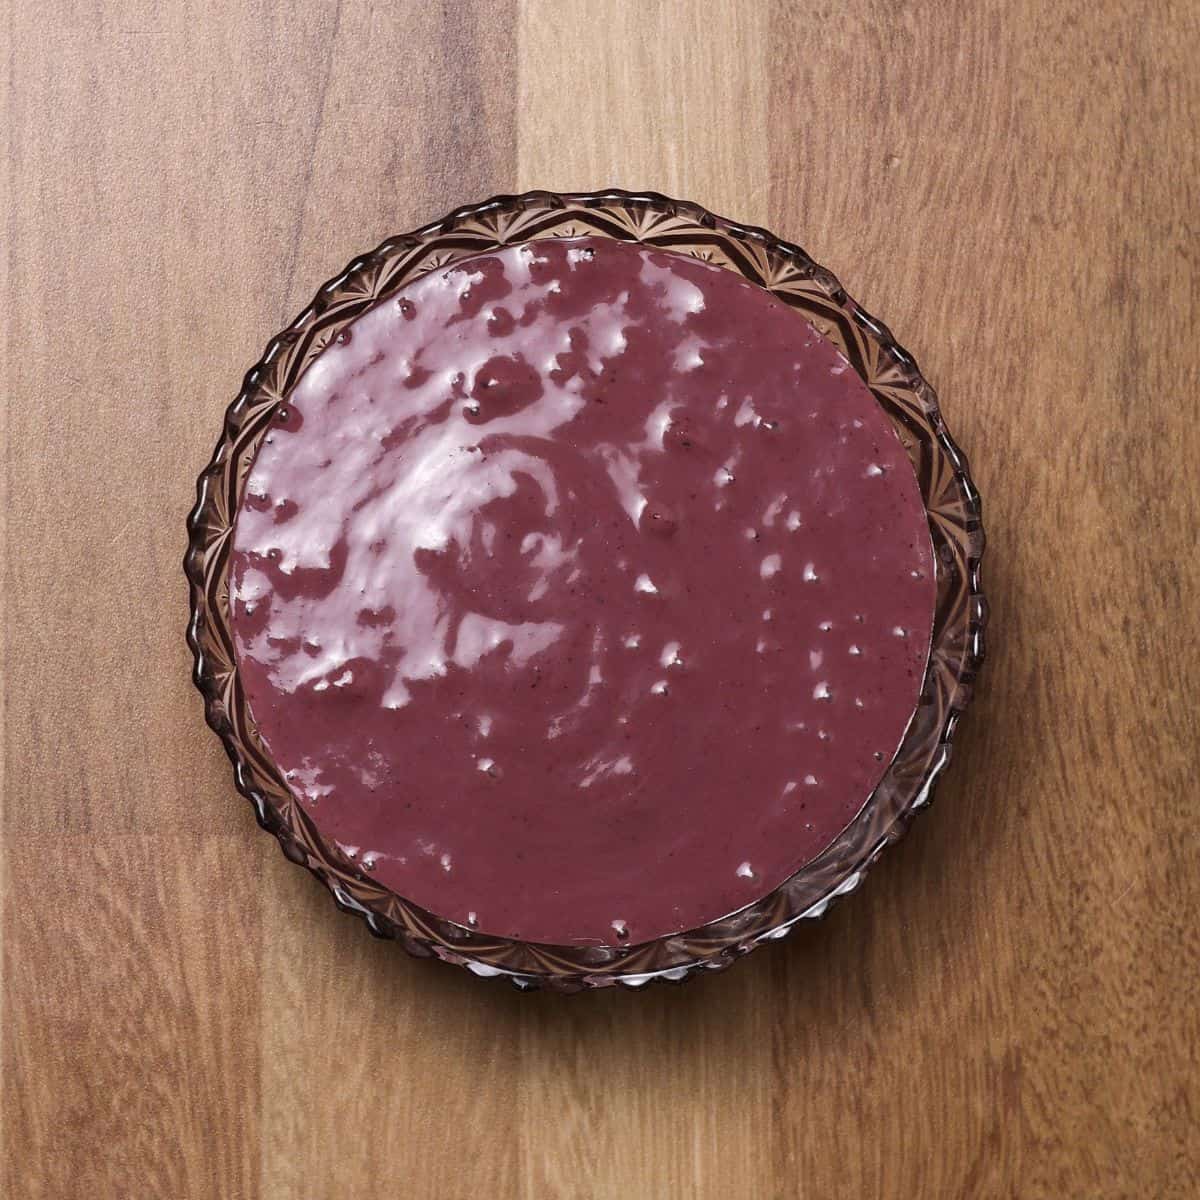 Overhead view of a glass bowl on a wooden surface filled with a smooth, purple acai blend, ready for toppings.